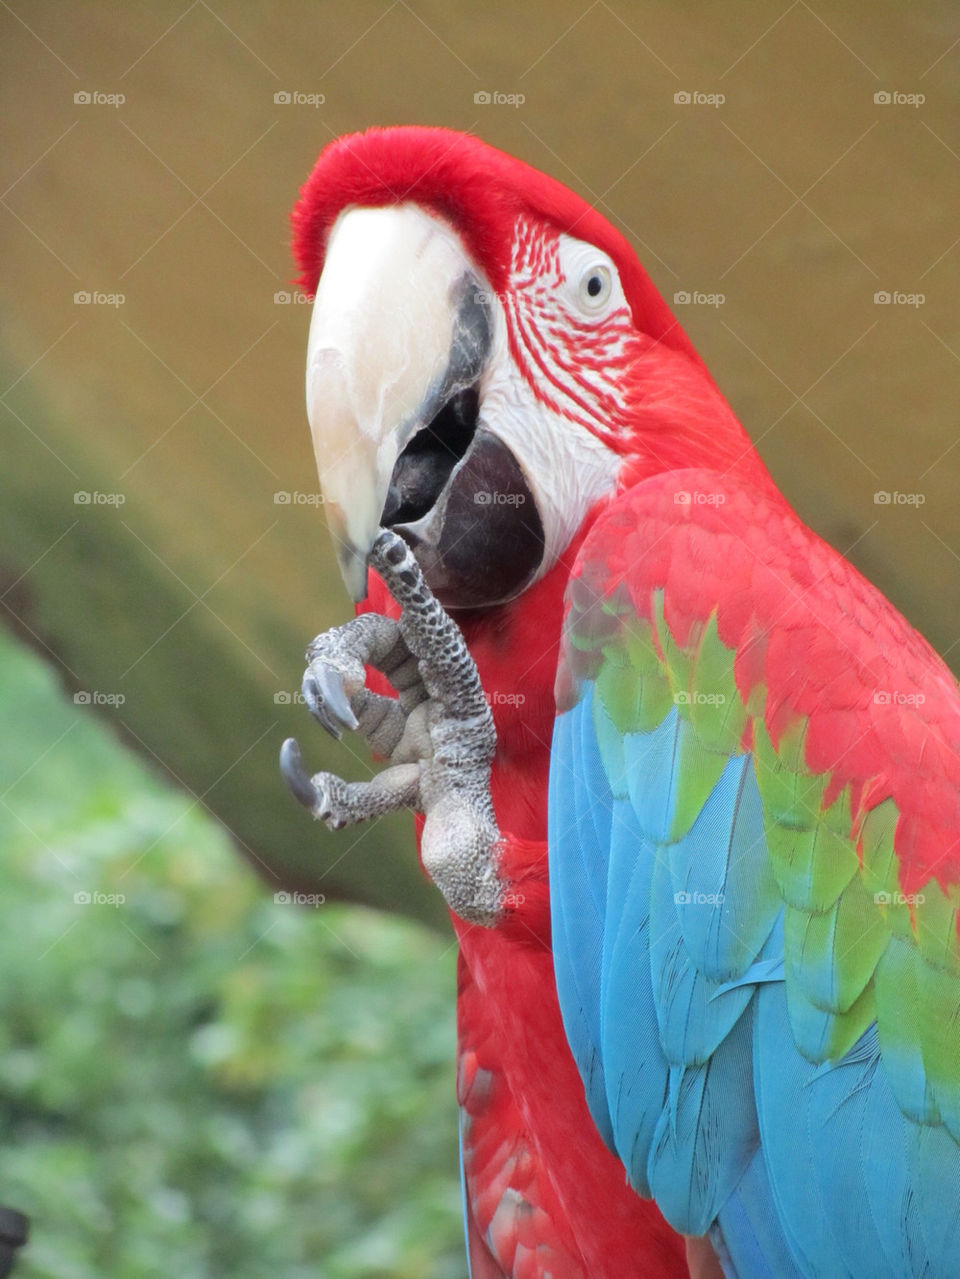 red bird zoo parrot by swatchtime